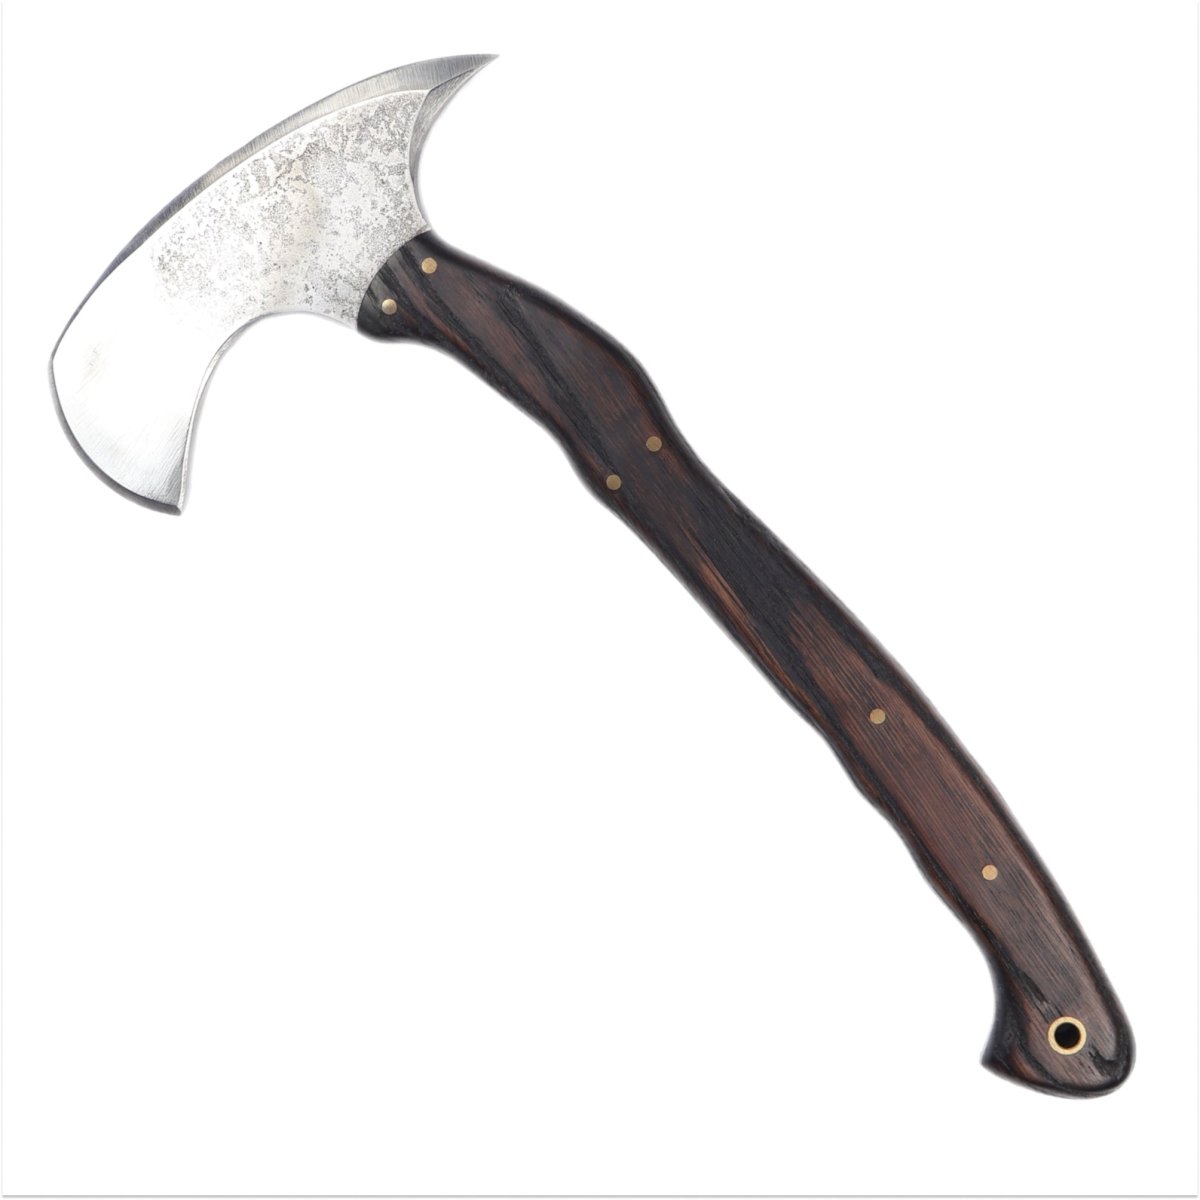 Tactical tomahawk "Egill" from AncientSmithy